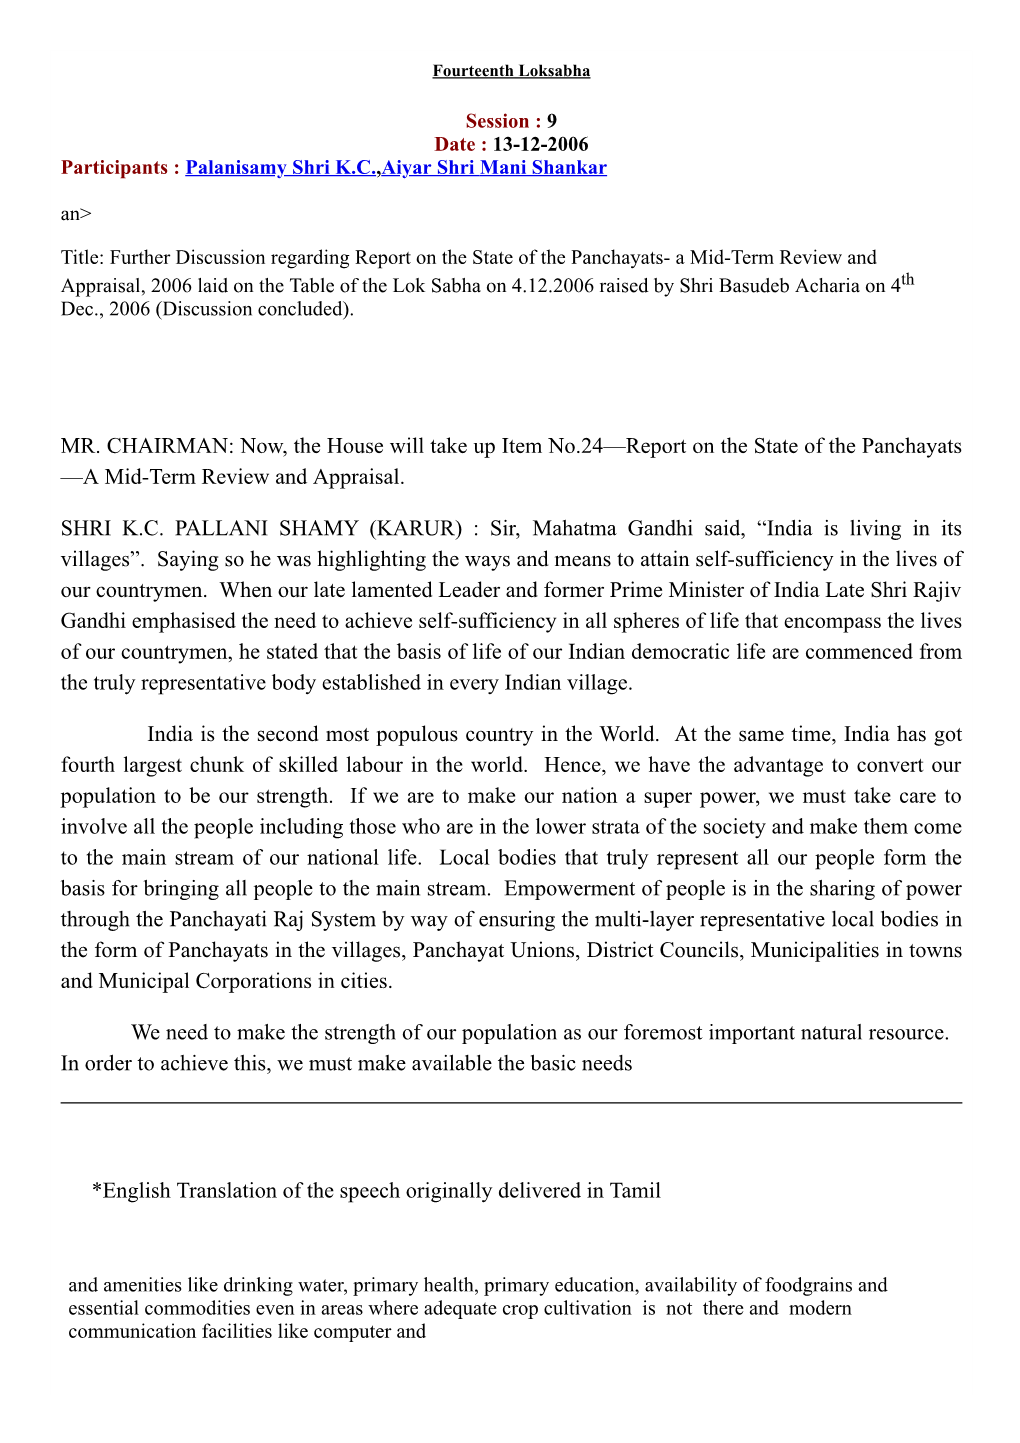 MR. CHAIRMAN: Now, the House Will Take up Item No.24—Report on the State of the Panchayats —A Mid-Term Review and Appraisal